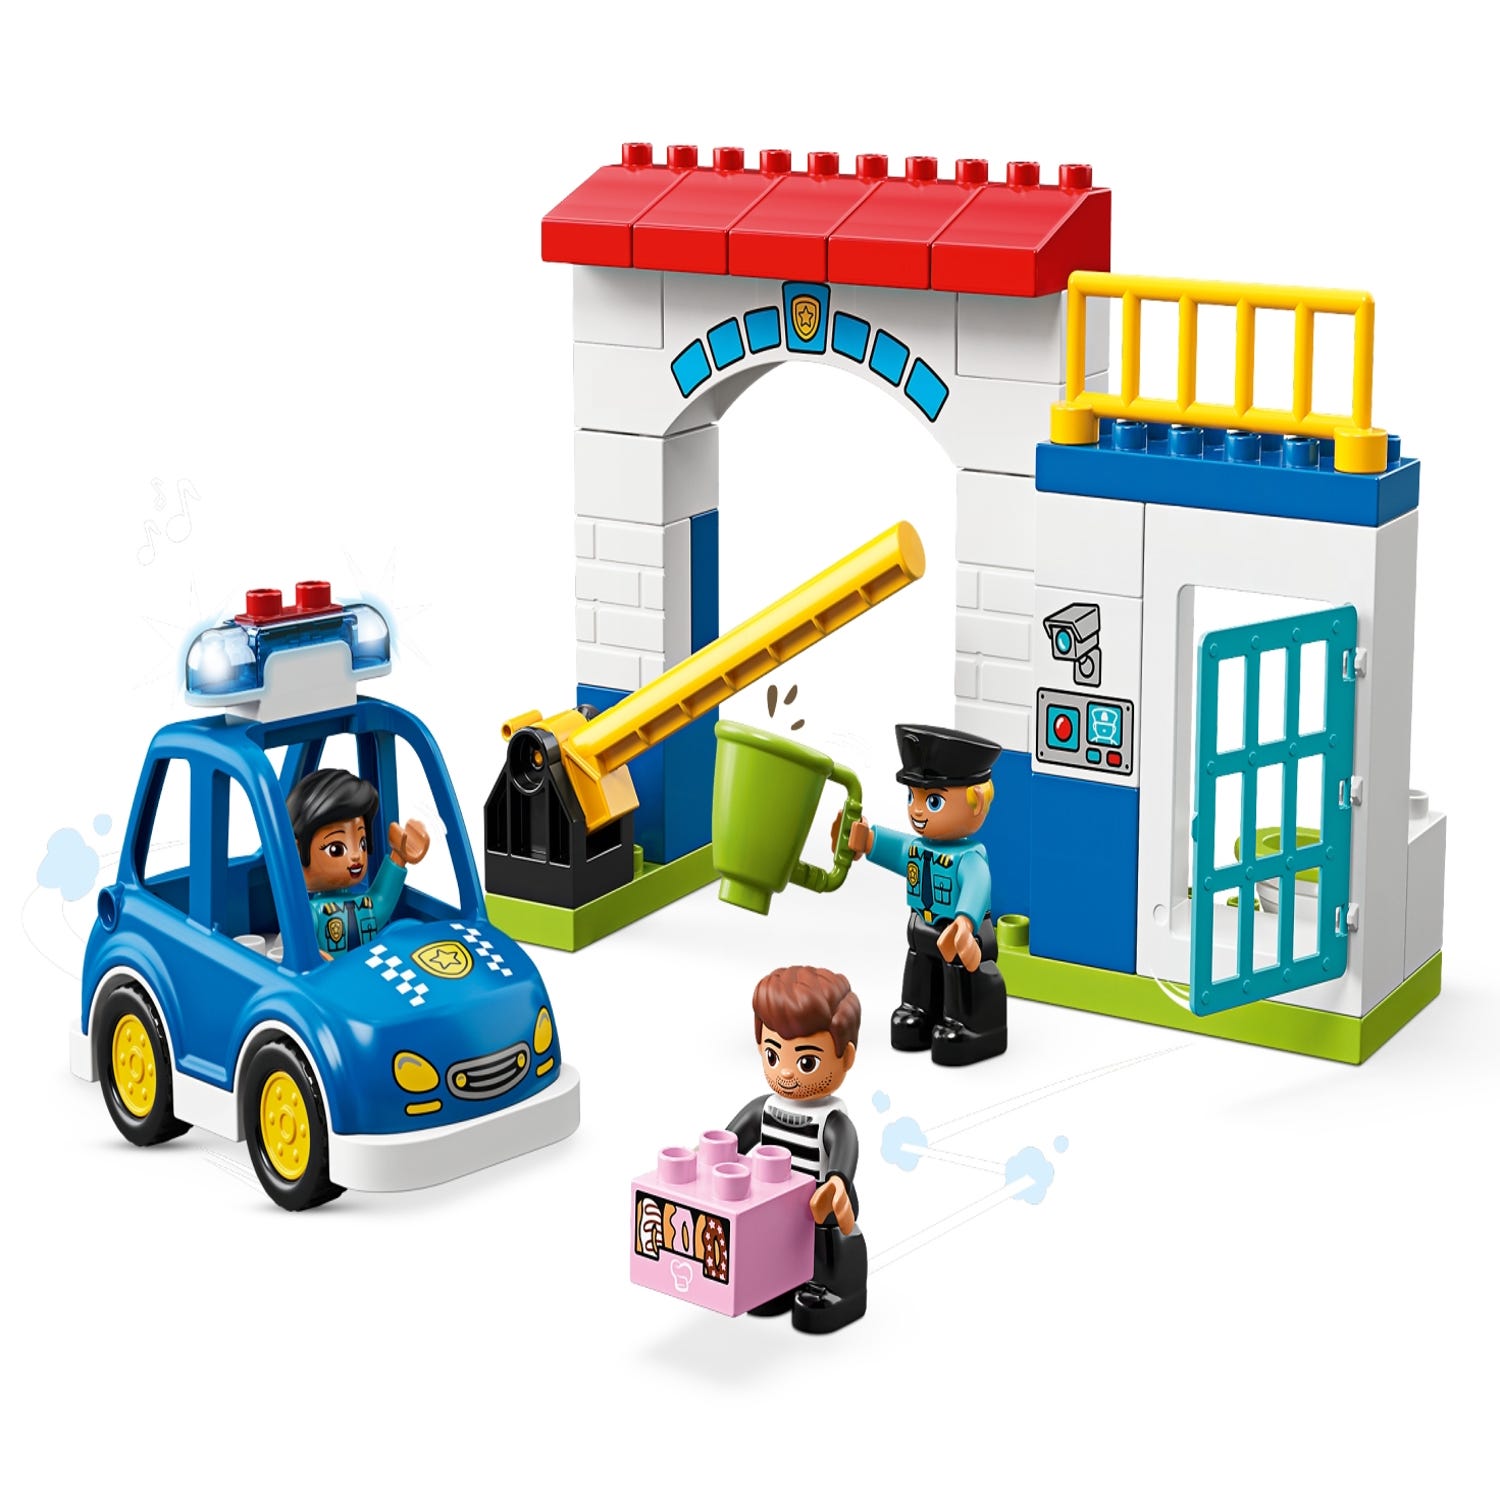 Police Station 10902 | DUPLO® Buy online at the Official LEGO® Shop